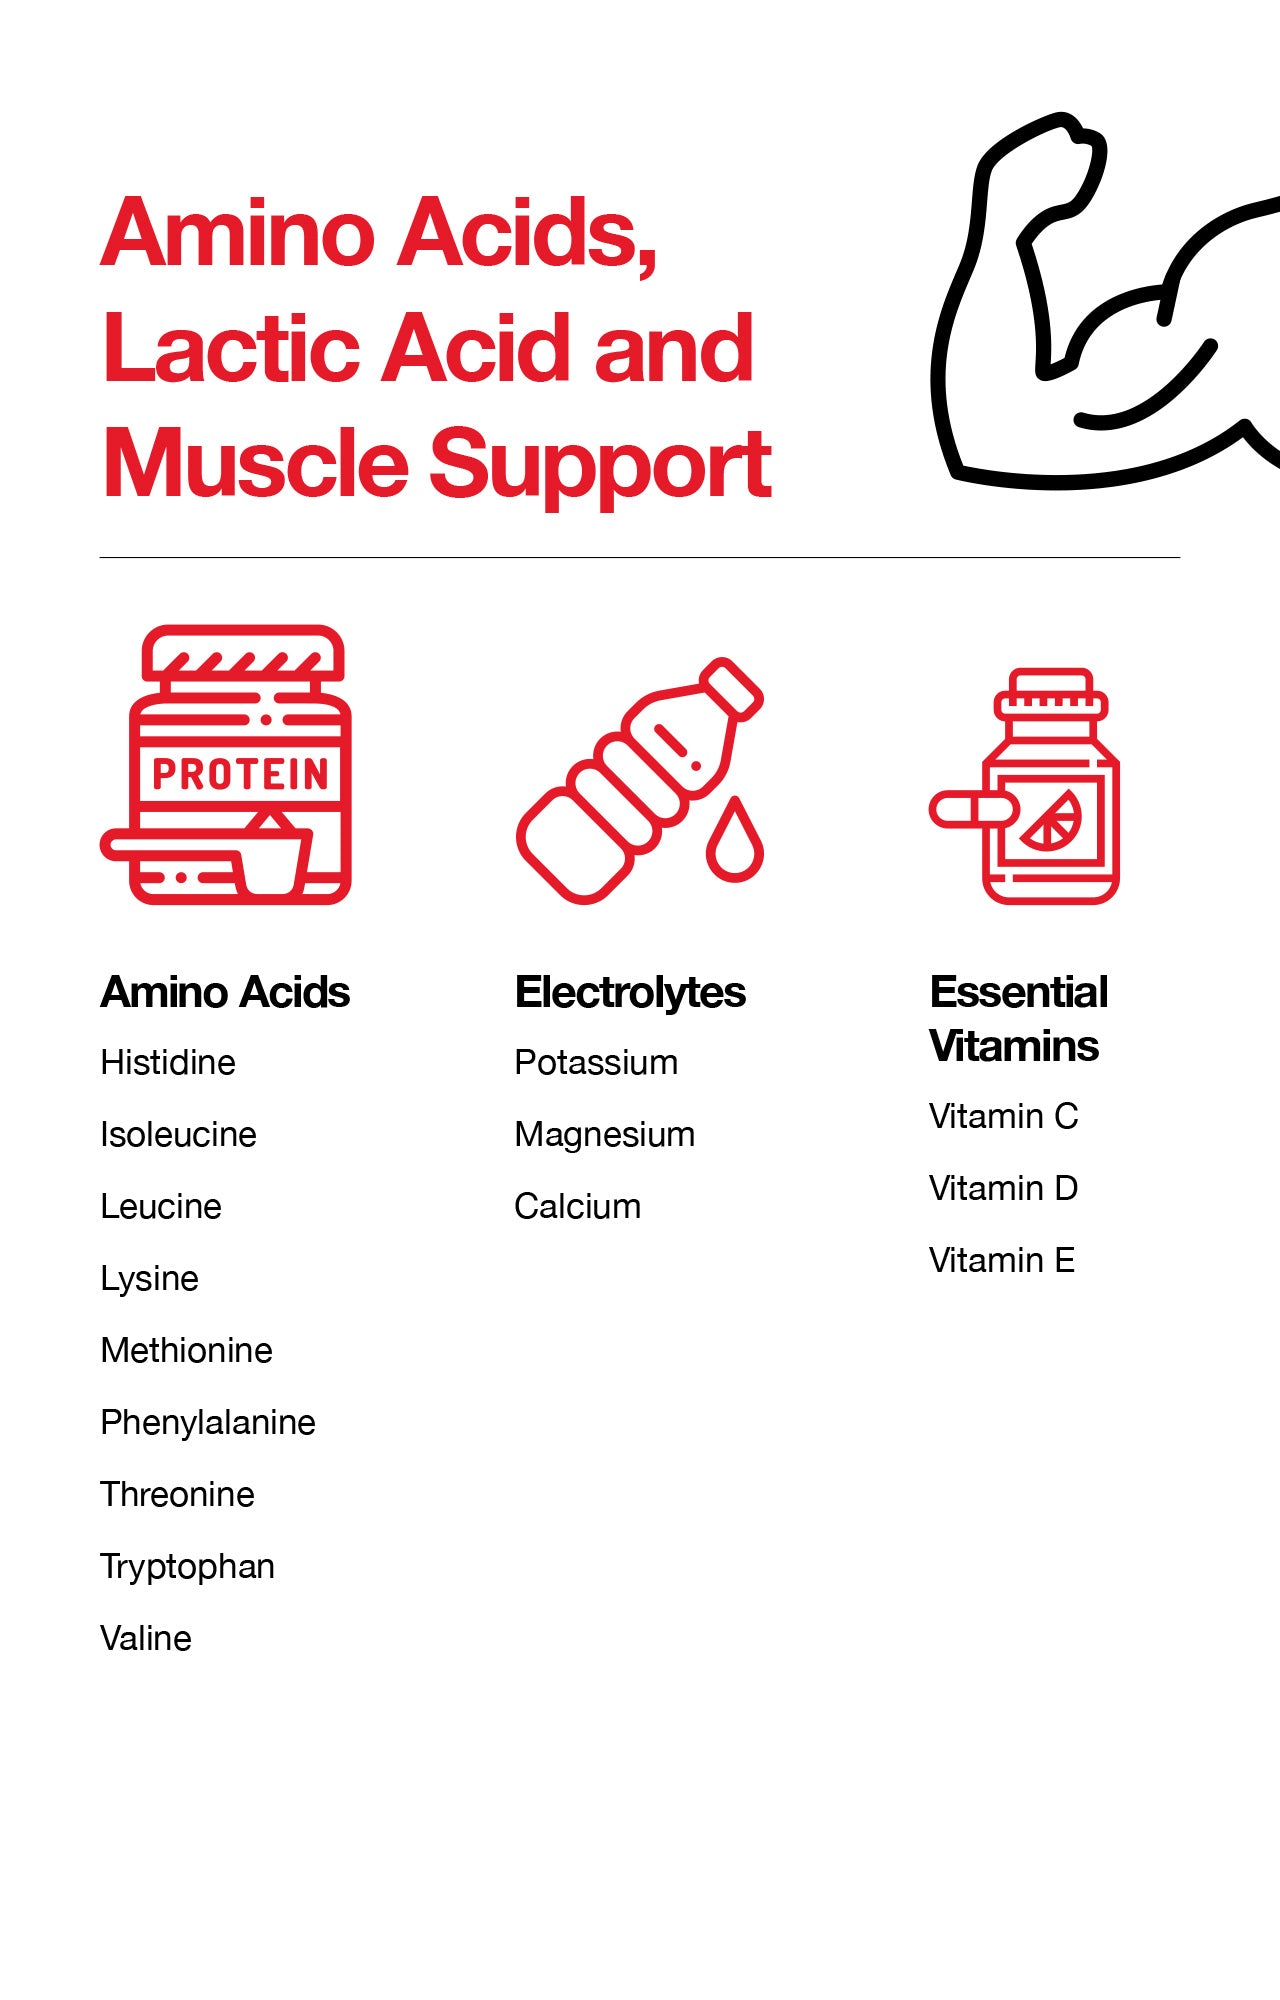 Amino Acids, Lactic Acid and Muscle Support